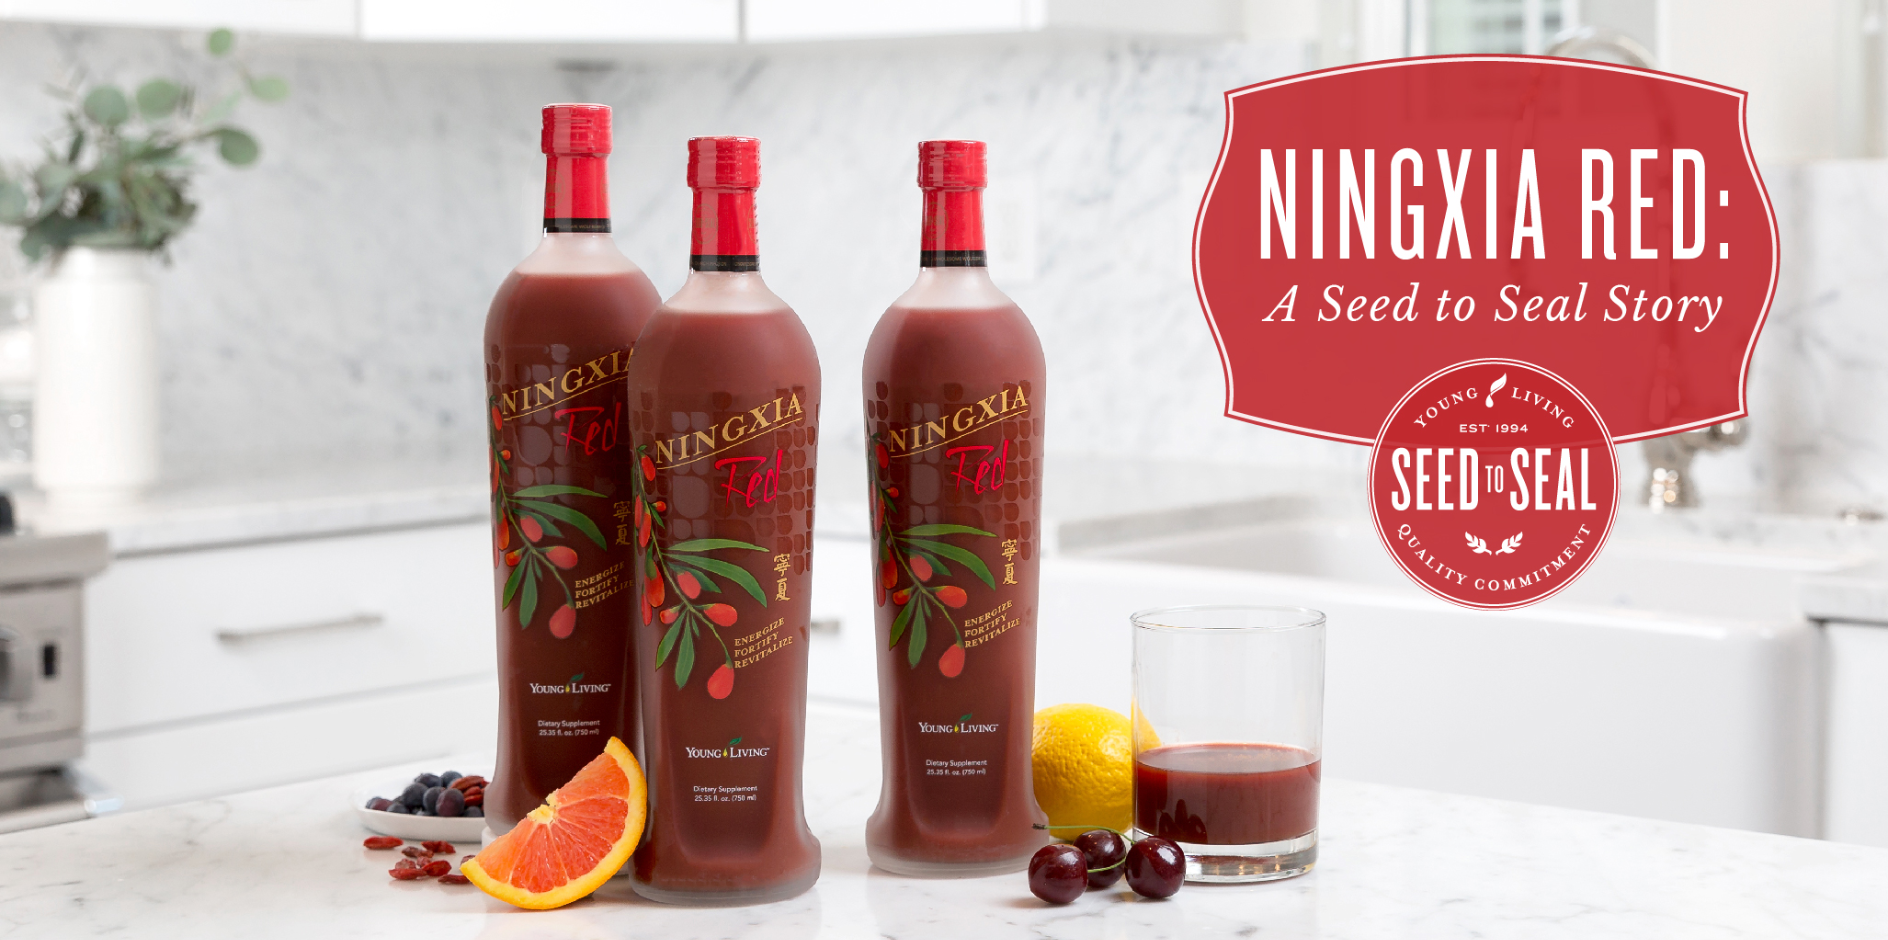 NingXia Red: a Seed to Seal Story